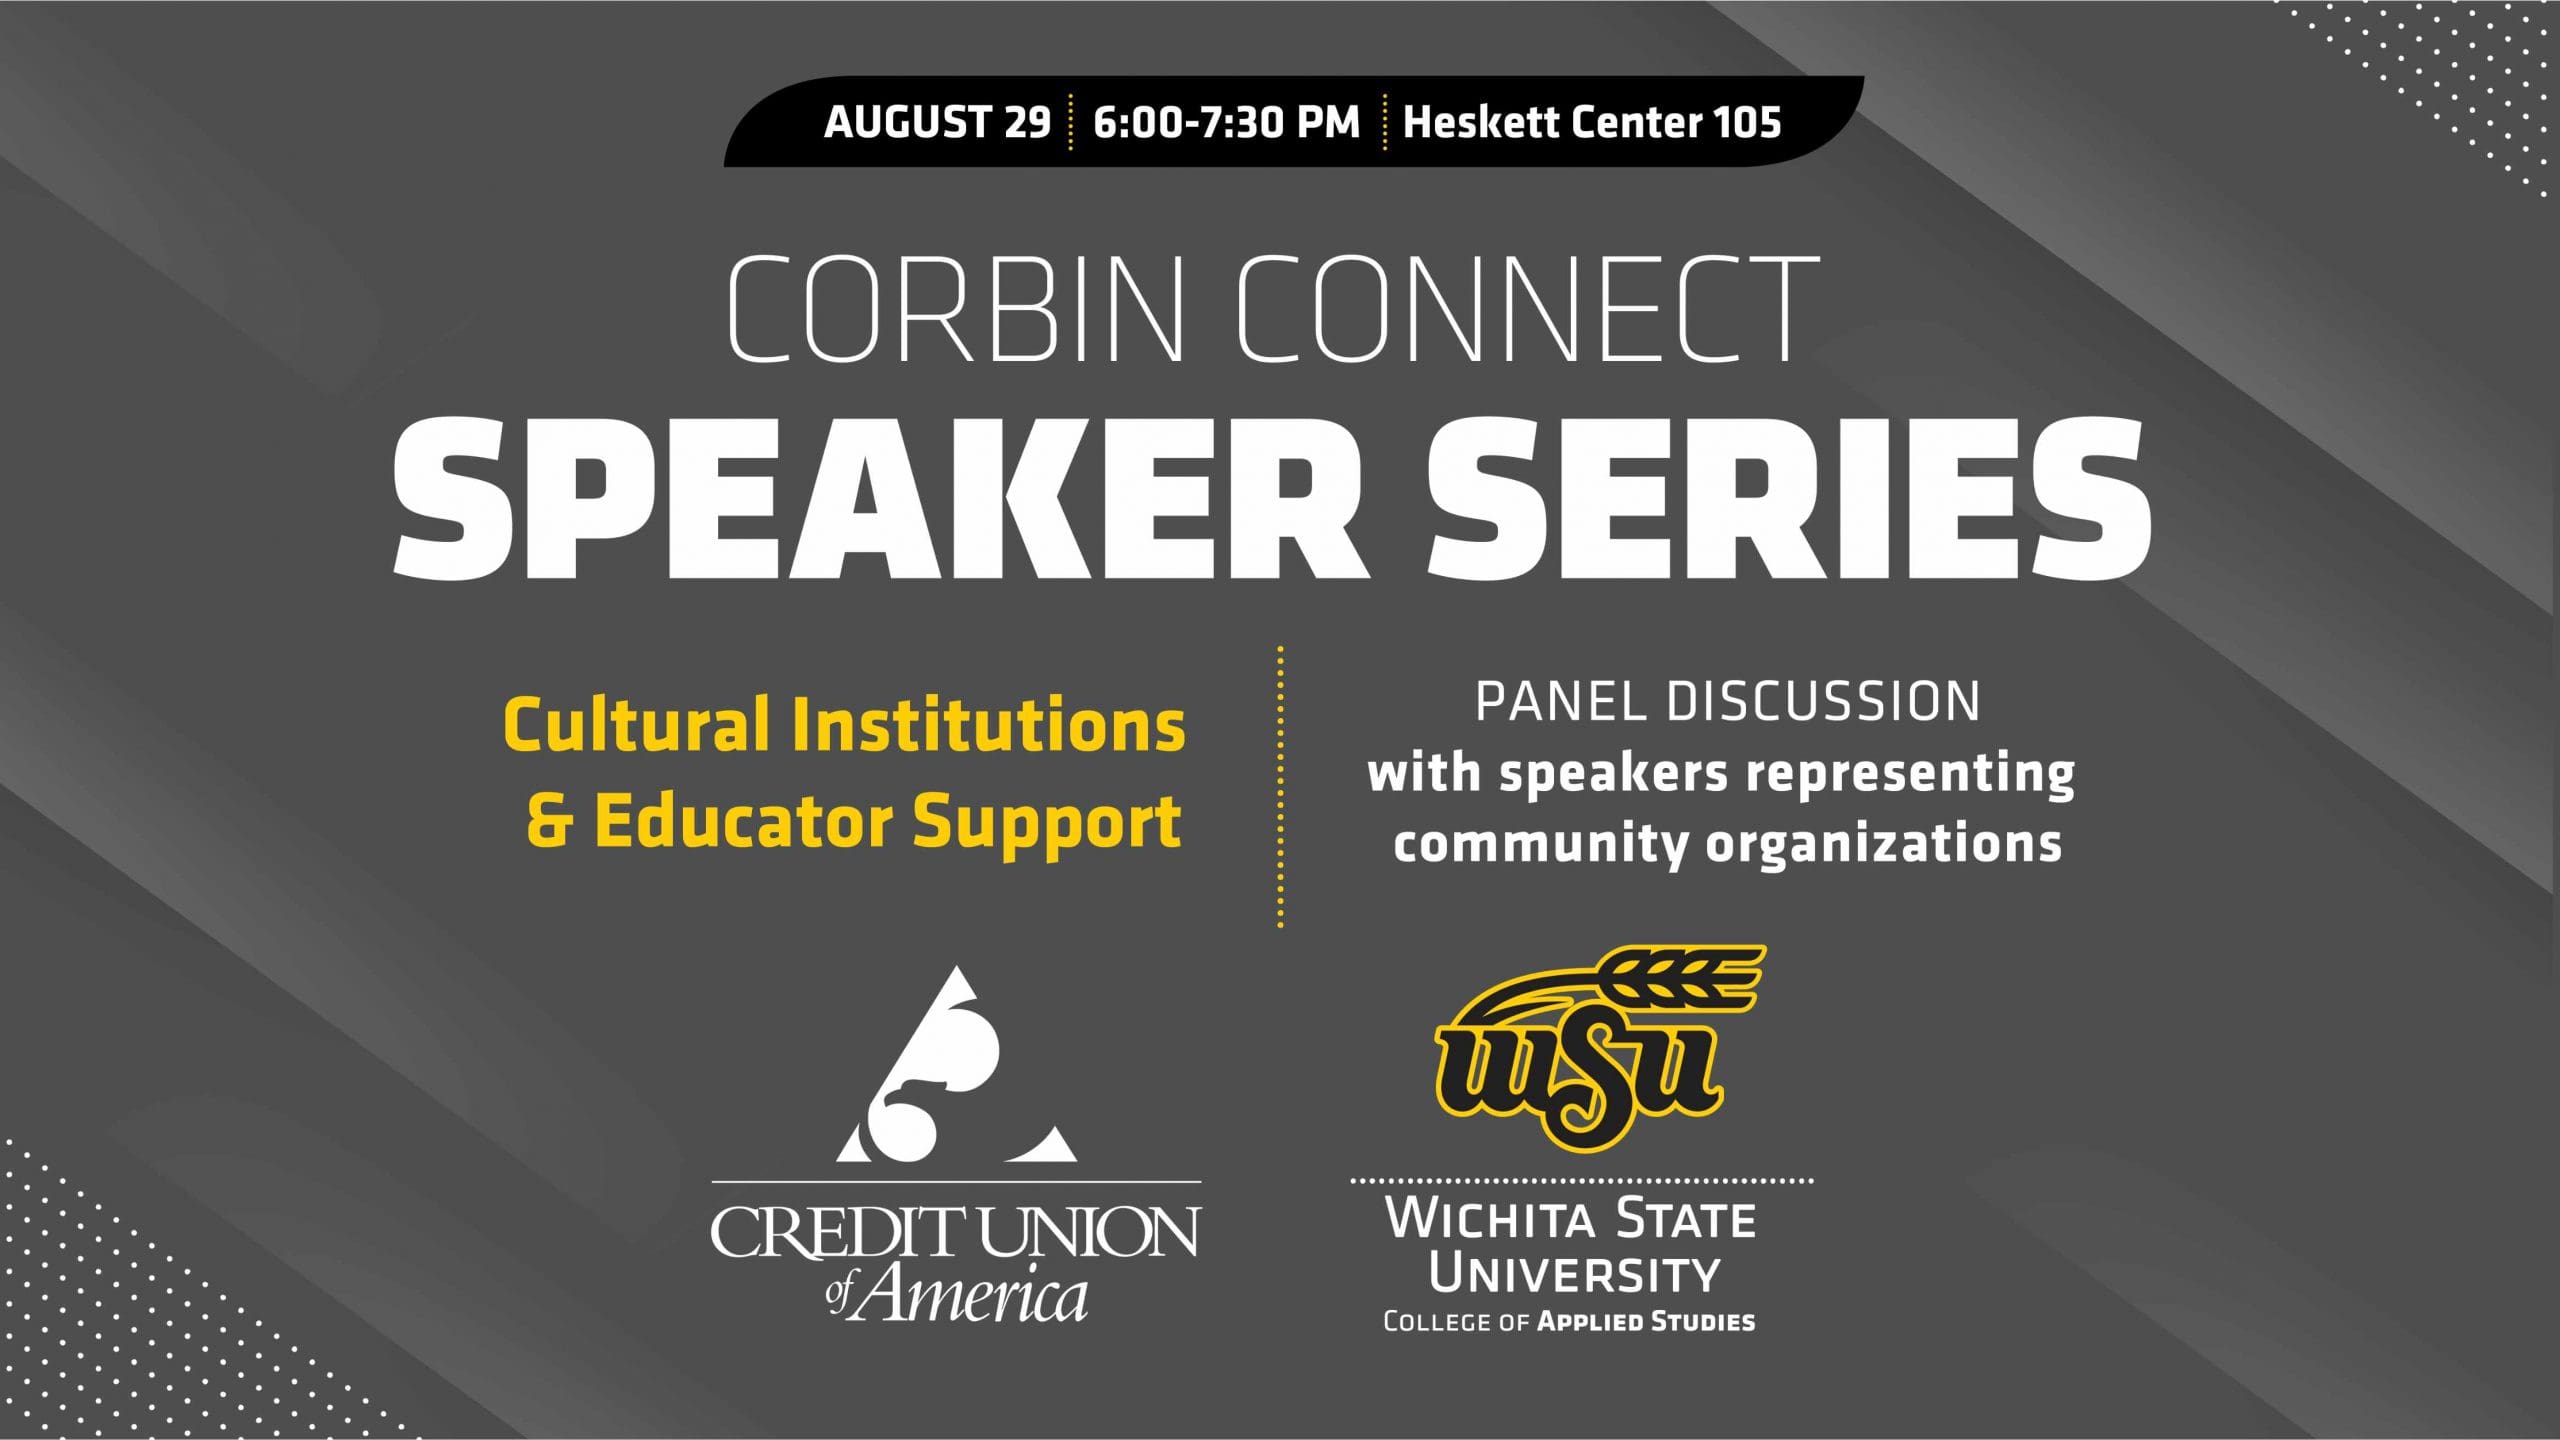 Grey textured background, black top element, August 29, 7-7:30 pm, Heskett Center Room 105, CORBIN CONNECT, SPEAKER SERIES, Cultural Institutions & Educator Support | PANEL DISCUSSION with speakers representing community organizations, CREDIT UNION OF AMERICA logo, WSU Wichita State College of Applied Studies logo